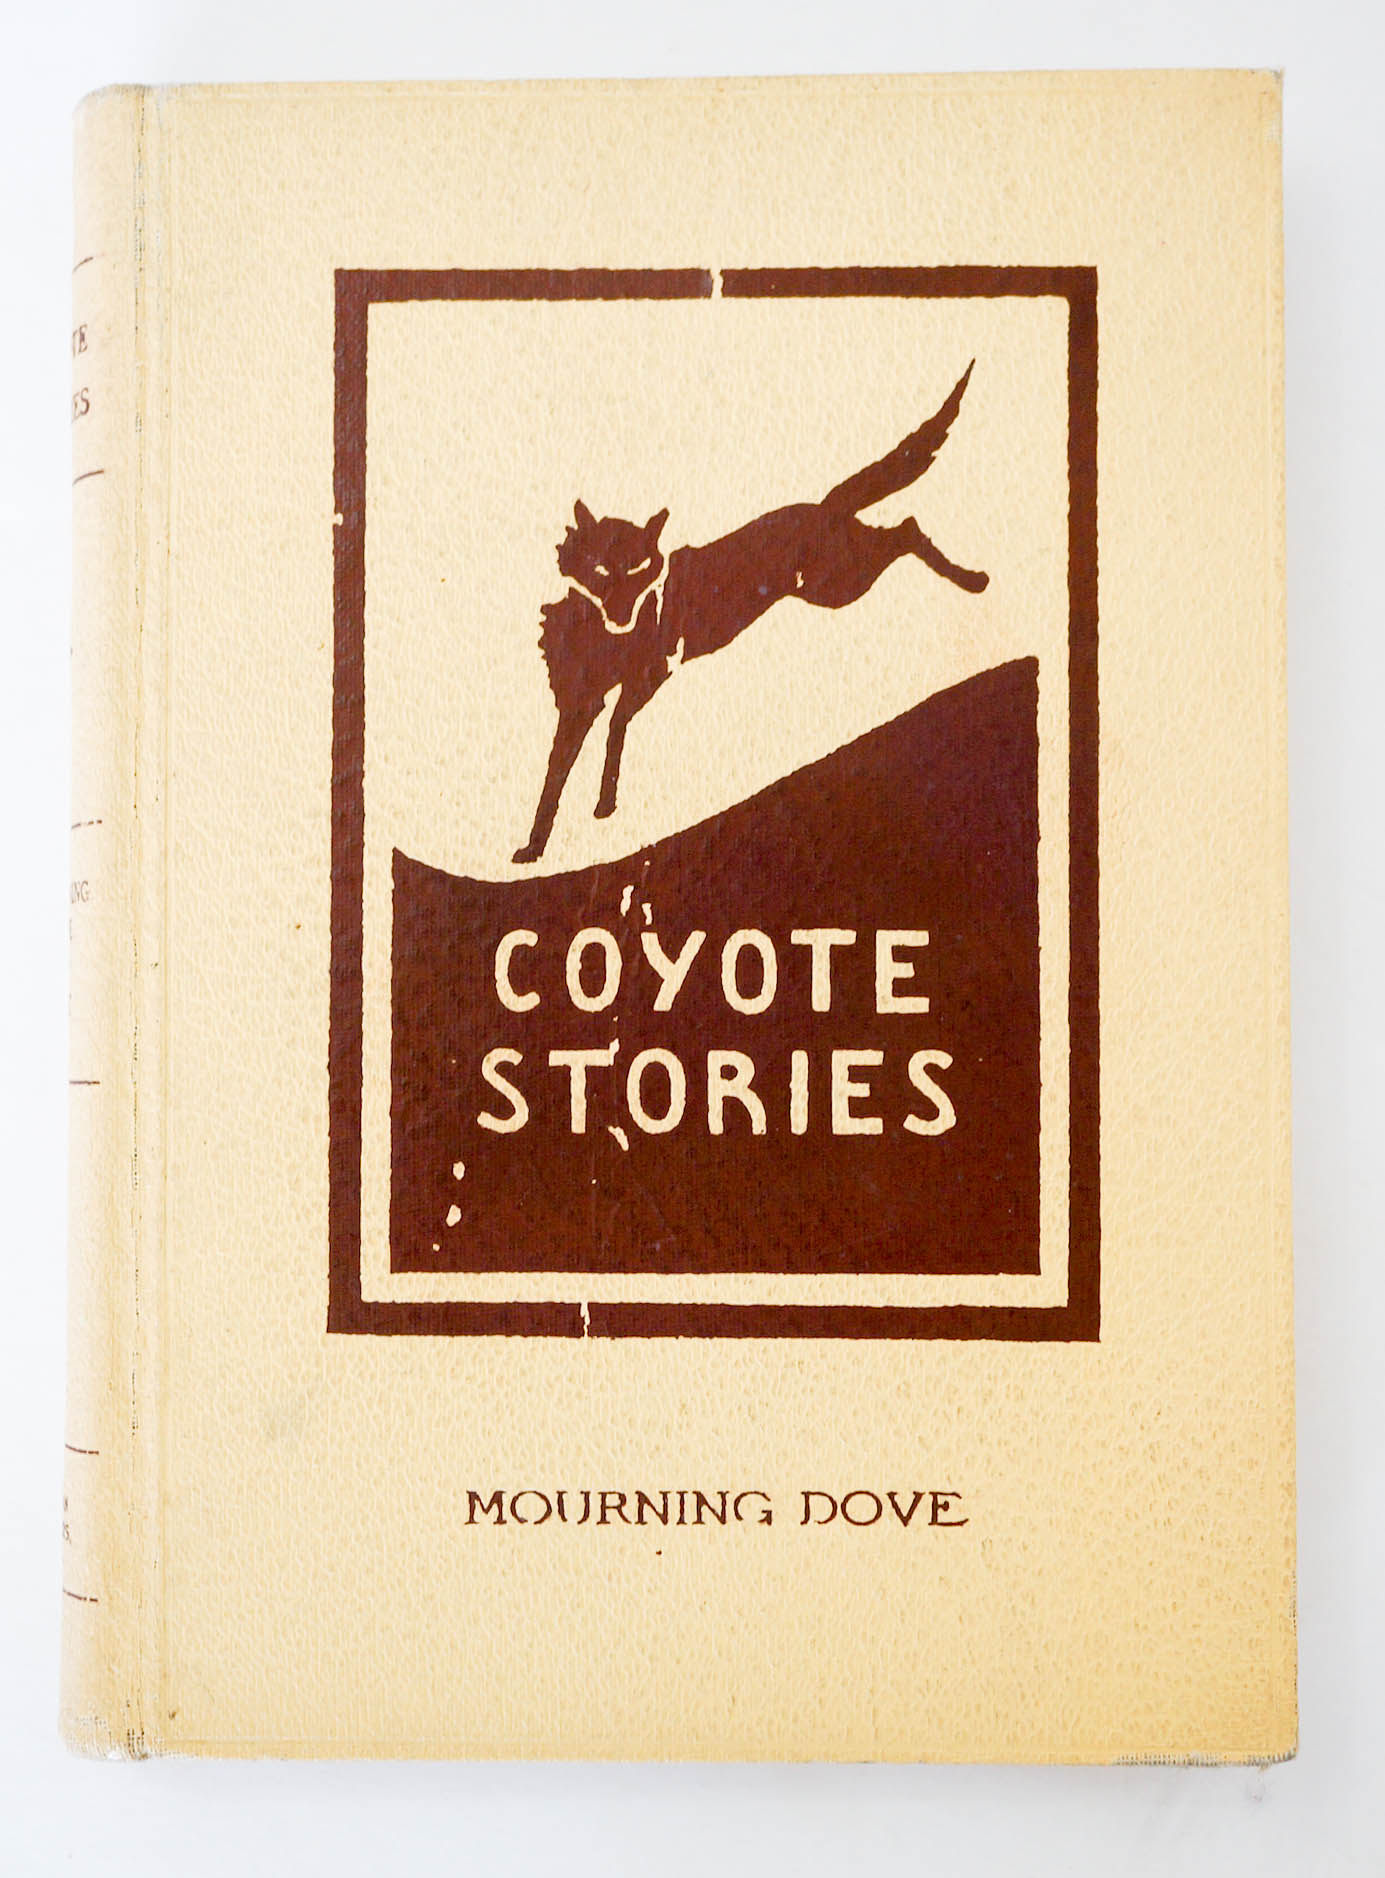 Coyote Stories by Mourning Dove (Hum-Ishu-Ma)